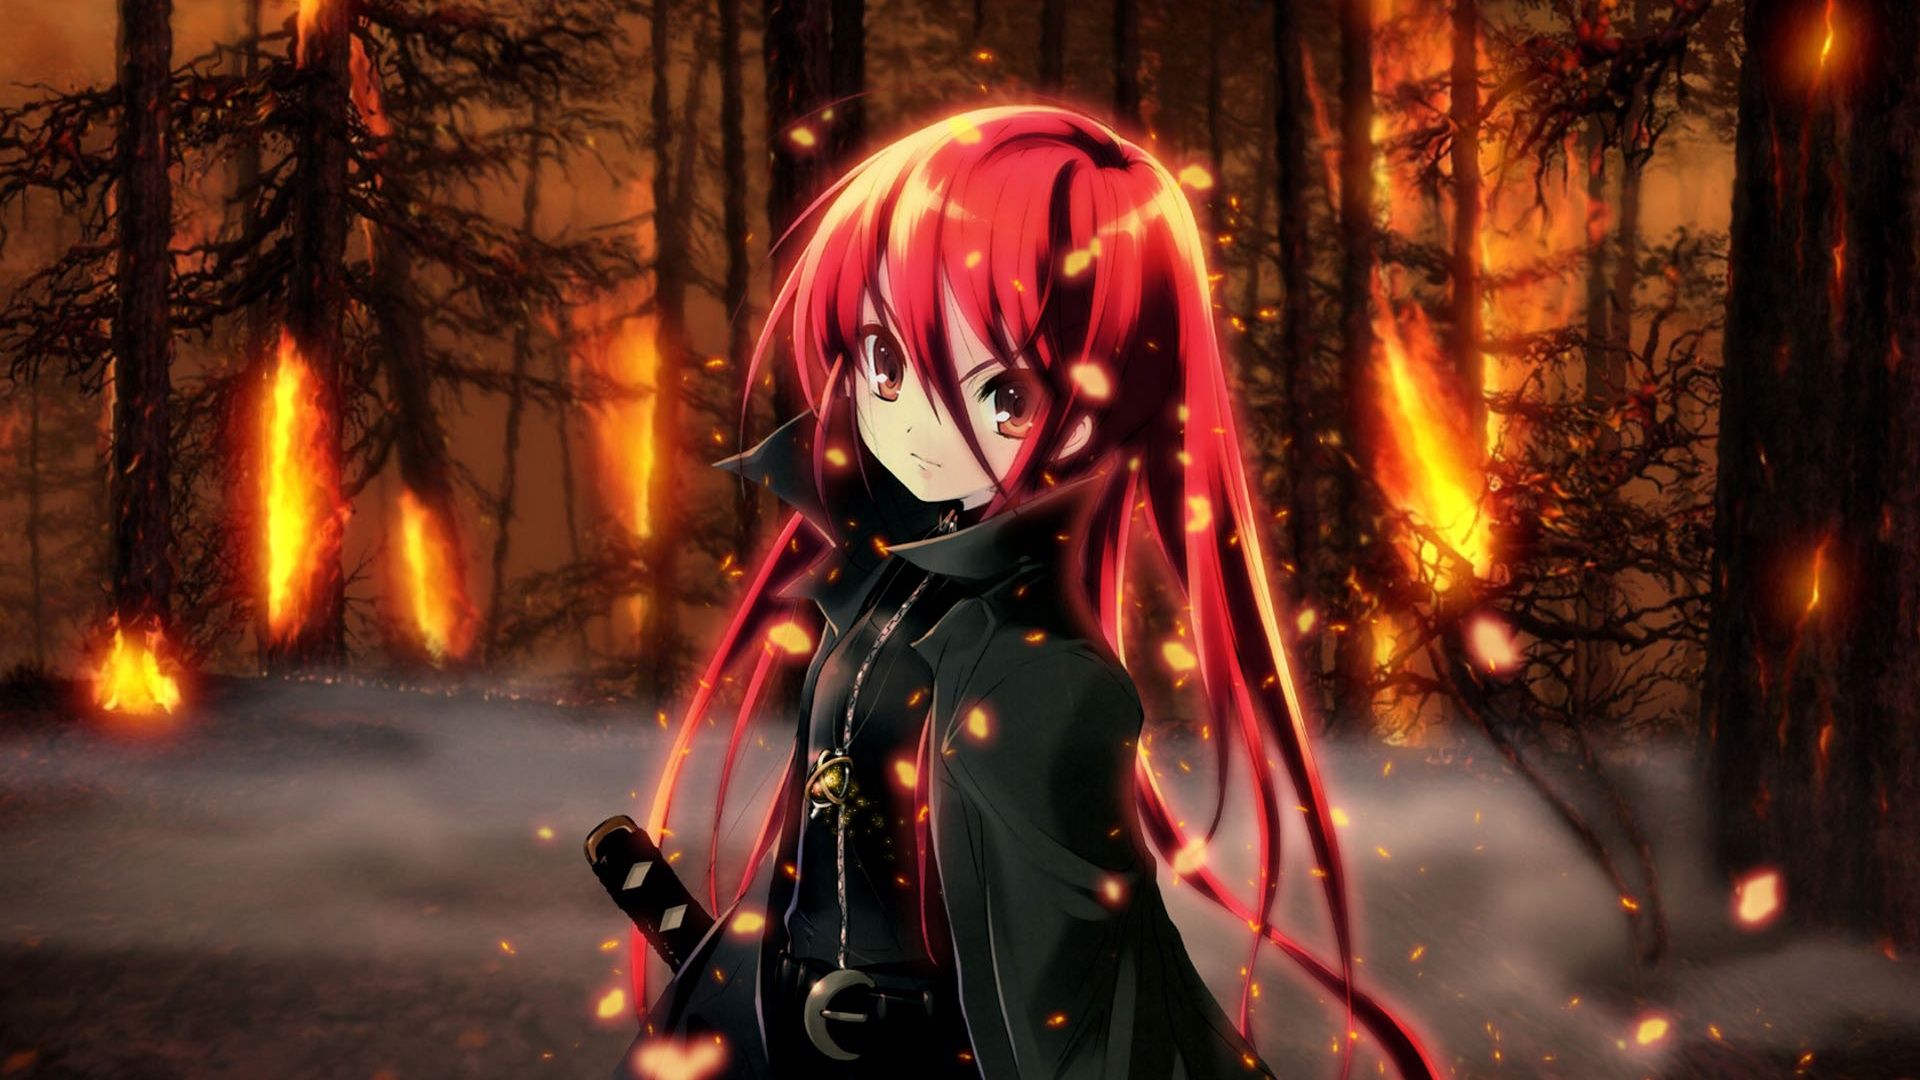 Wallpaper In the forest of red hair anime girl 1920x1200 HD